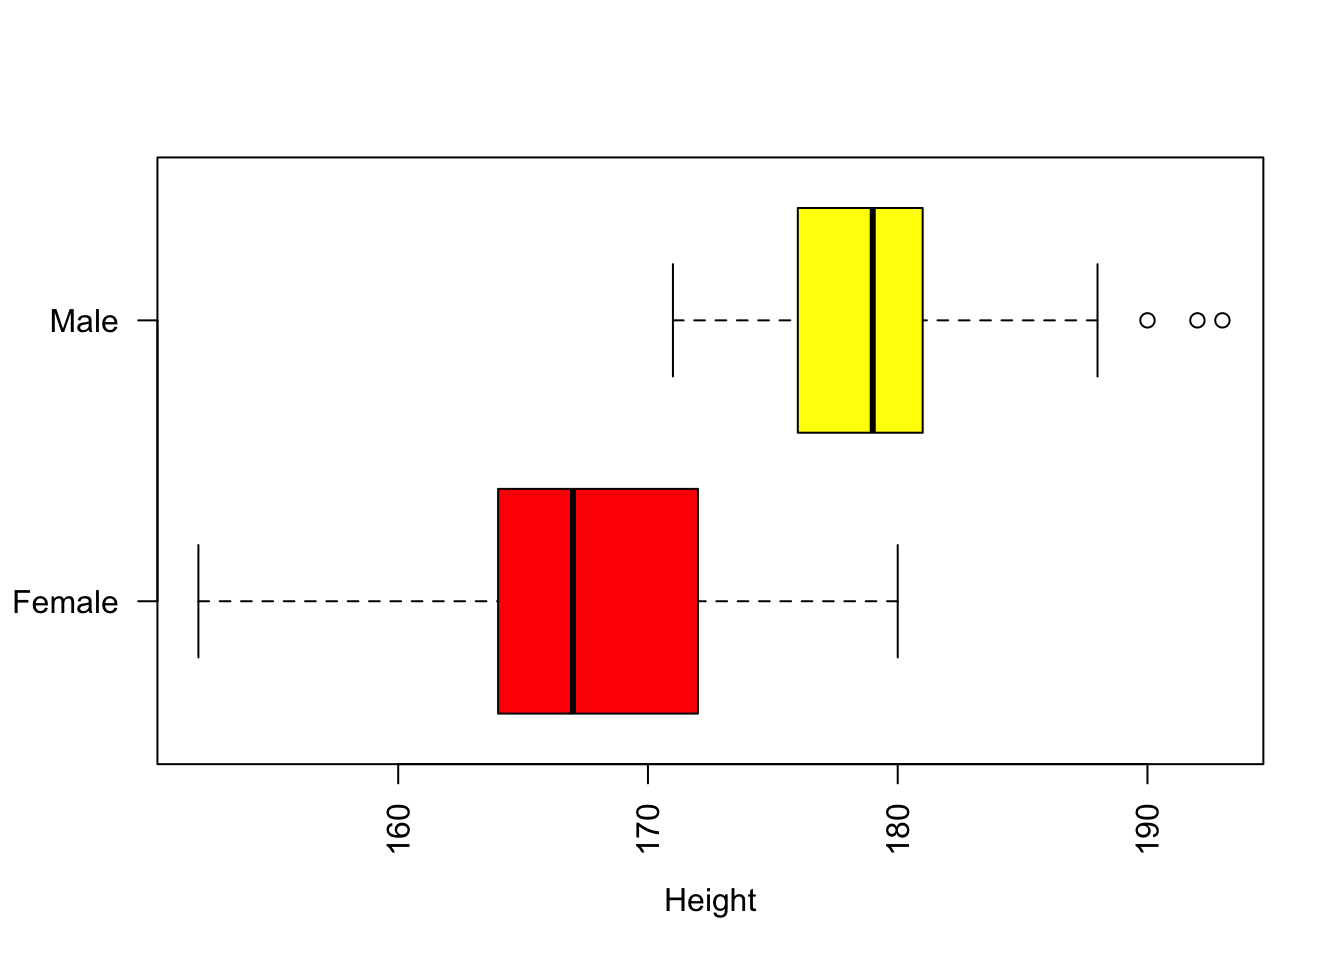 Boxplots of the distribution of the Height variable with Gender.